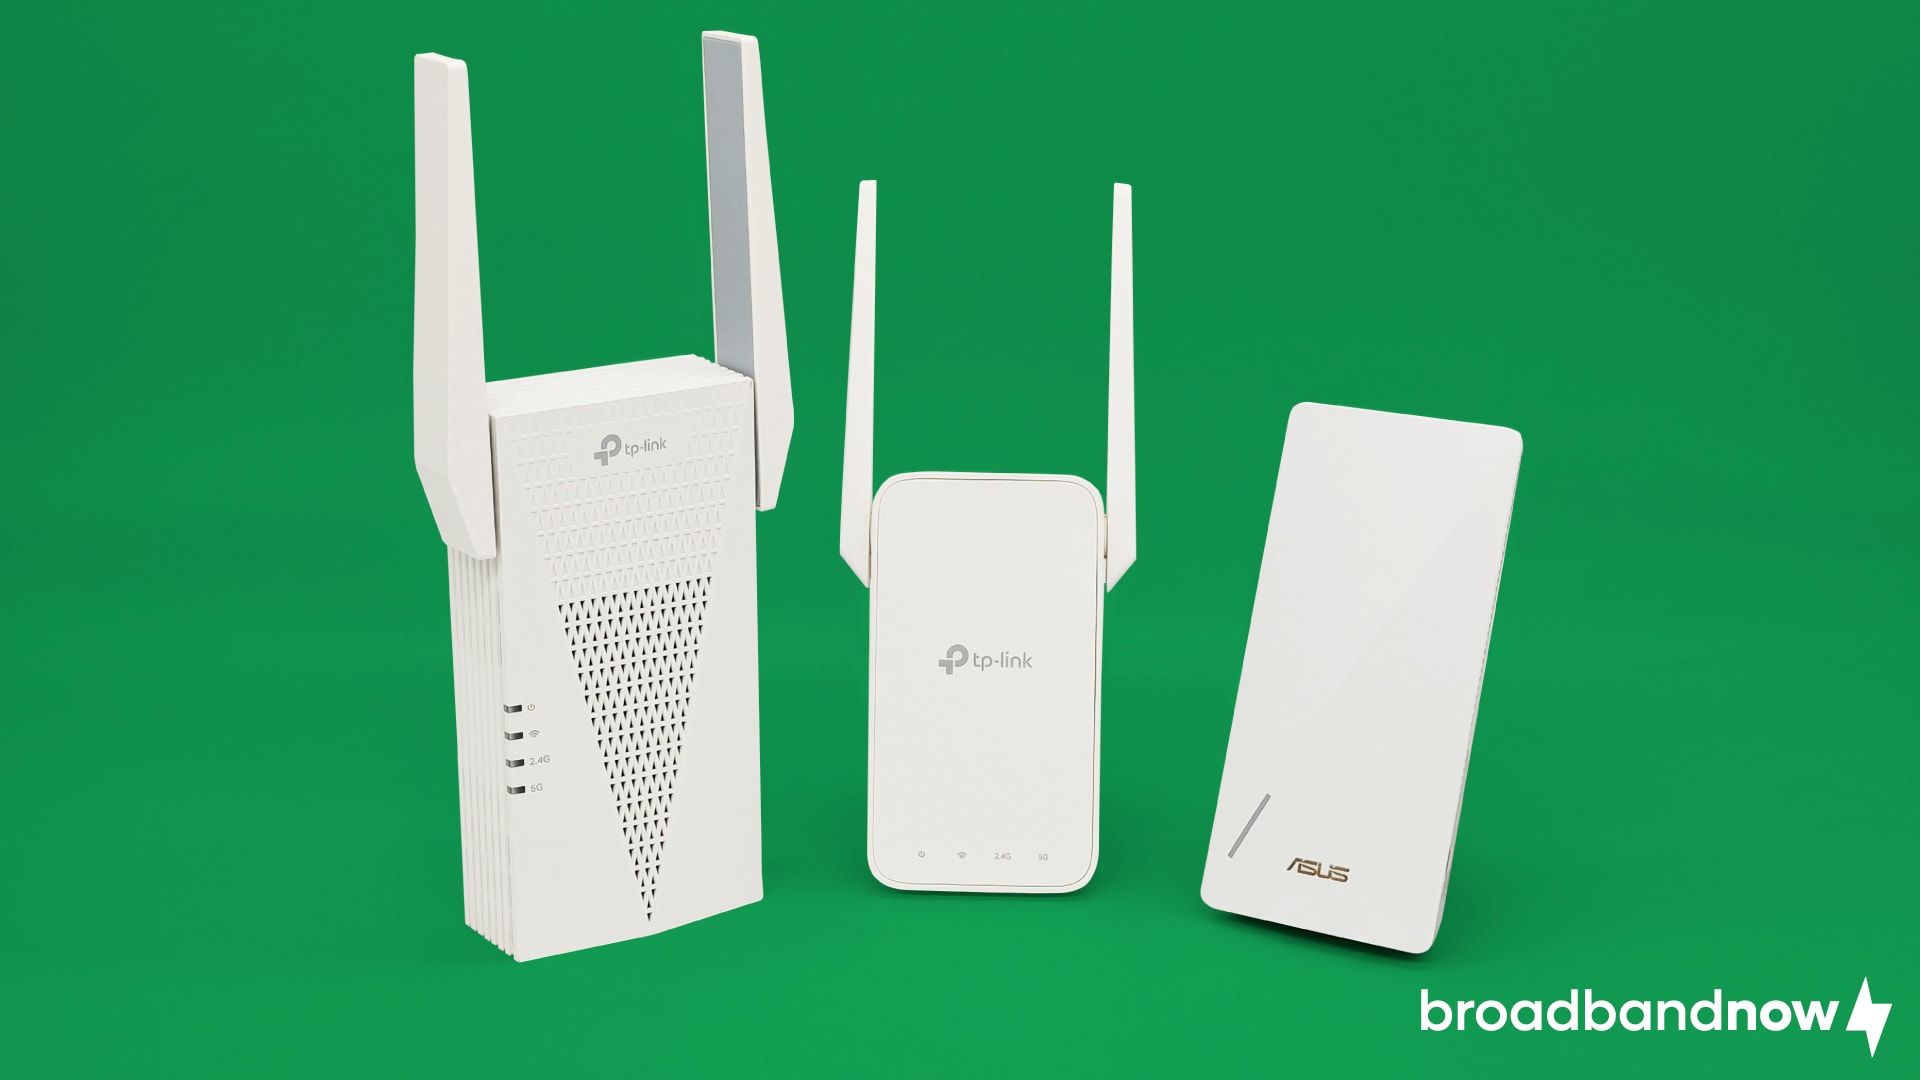 TP-Link RE715X, Asus RP-AX58, and TP-Link RE315 Wi-Fi extenders side by side on a green background